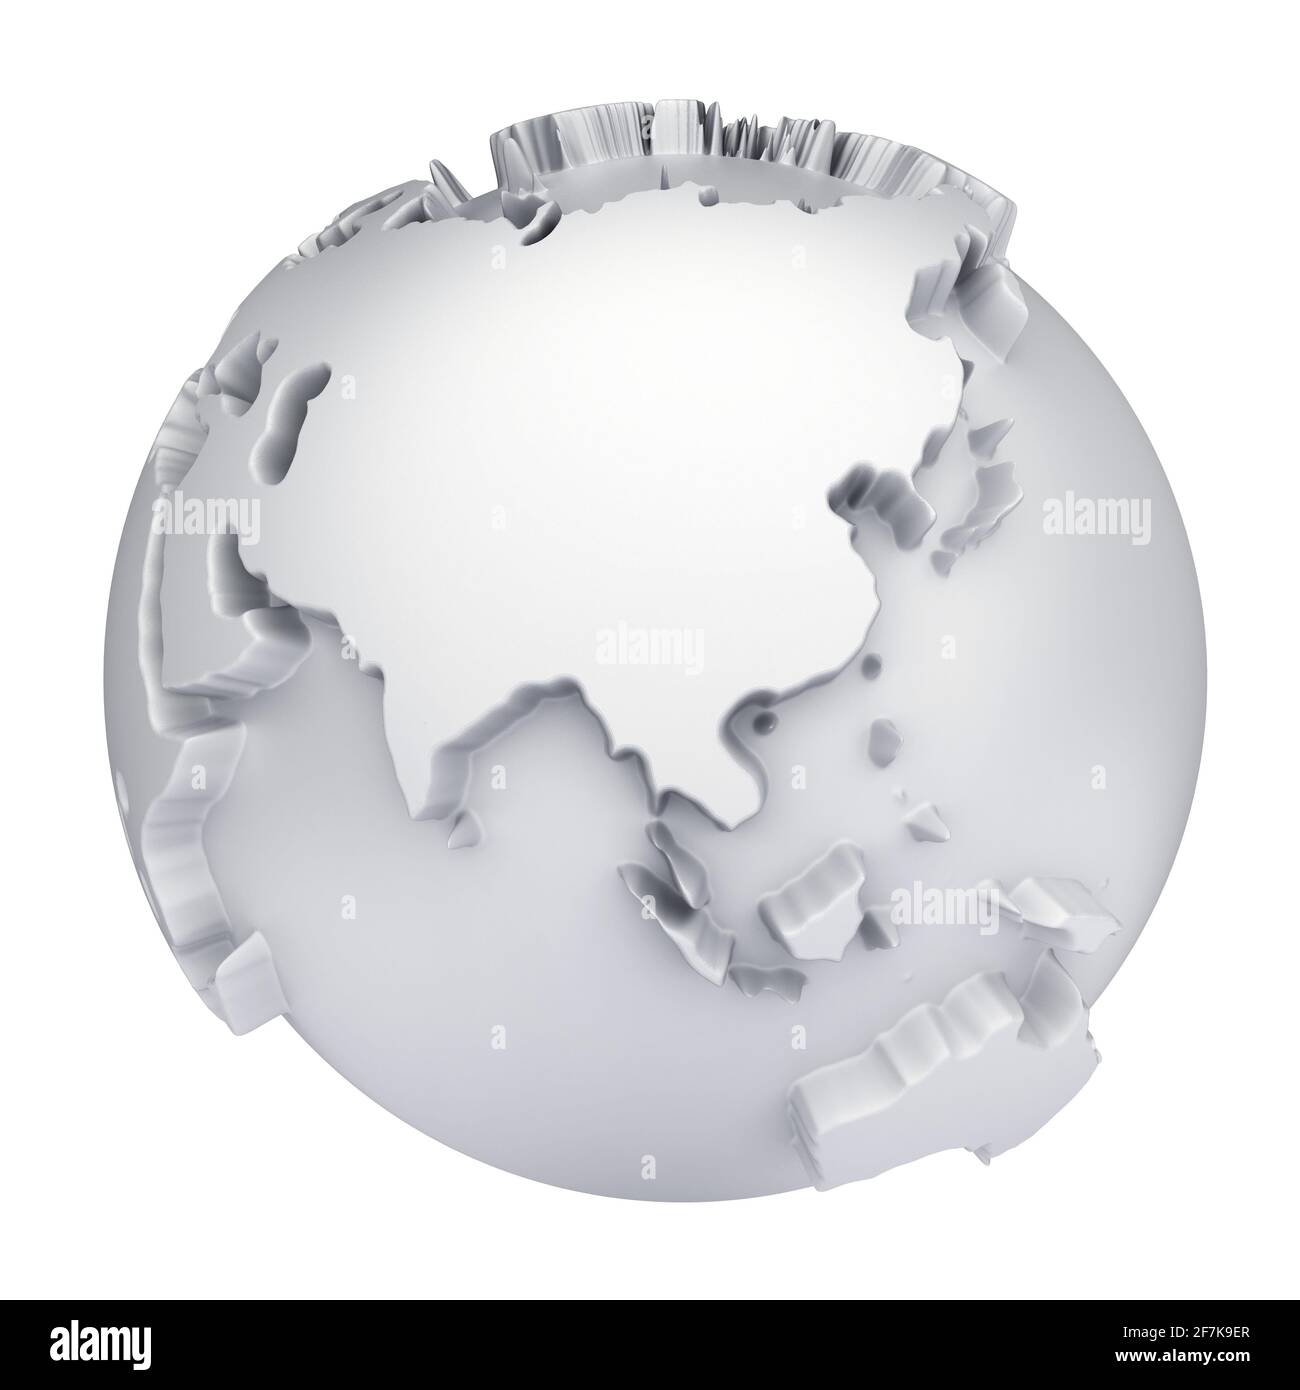 Earth world map. Asia and Australia on a planet globe. 3d concept illustration Stock Photo